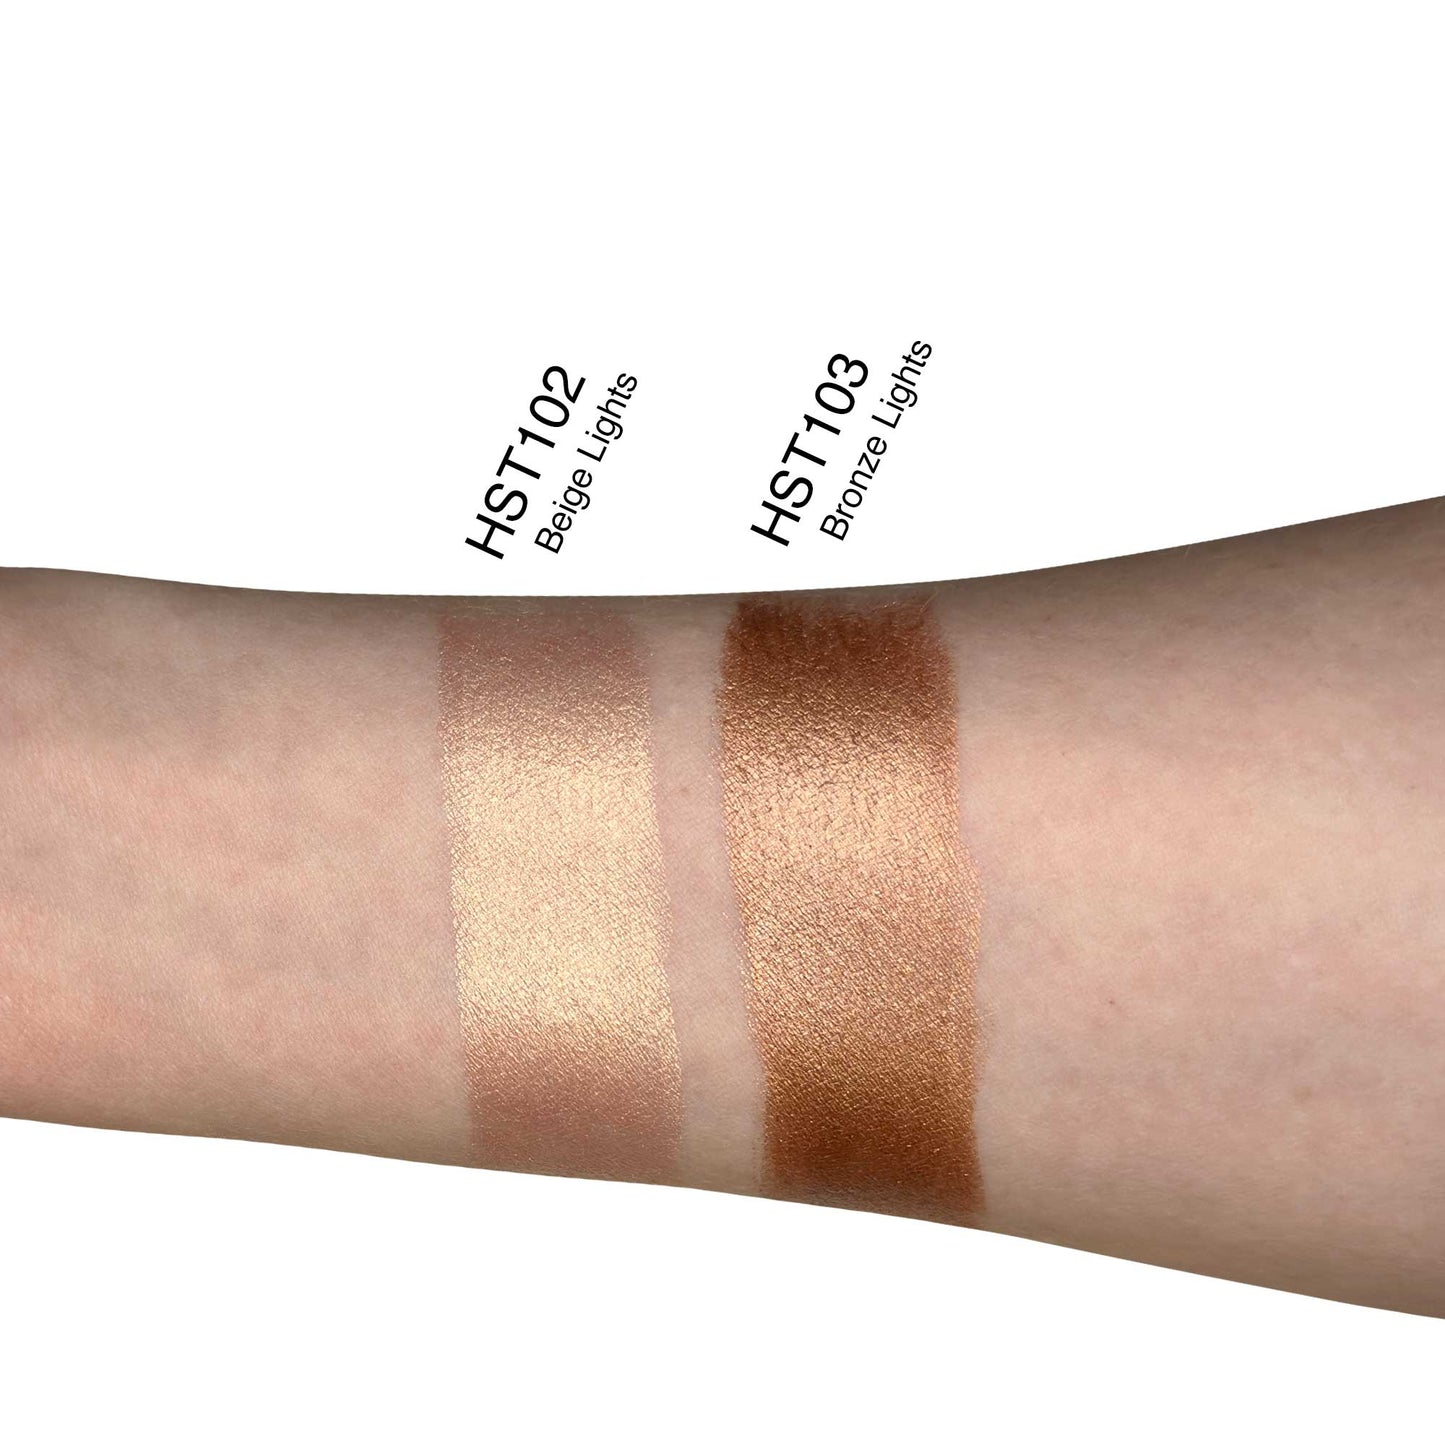 Arm showcasing three different bronze and gold makeup colors.